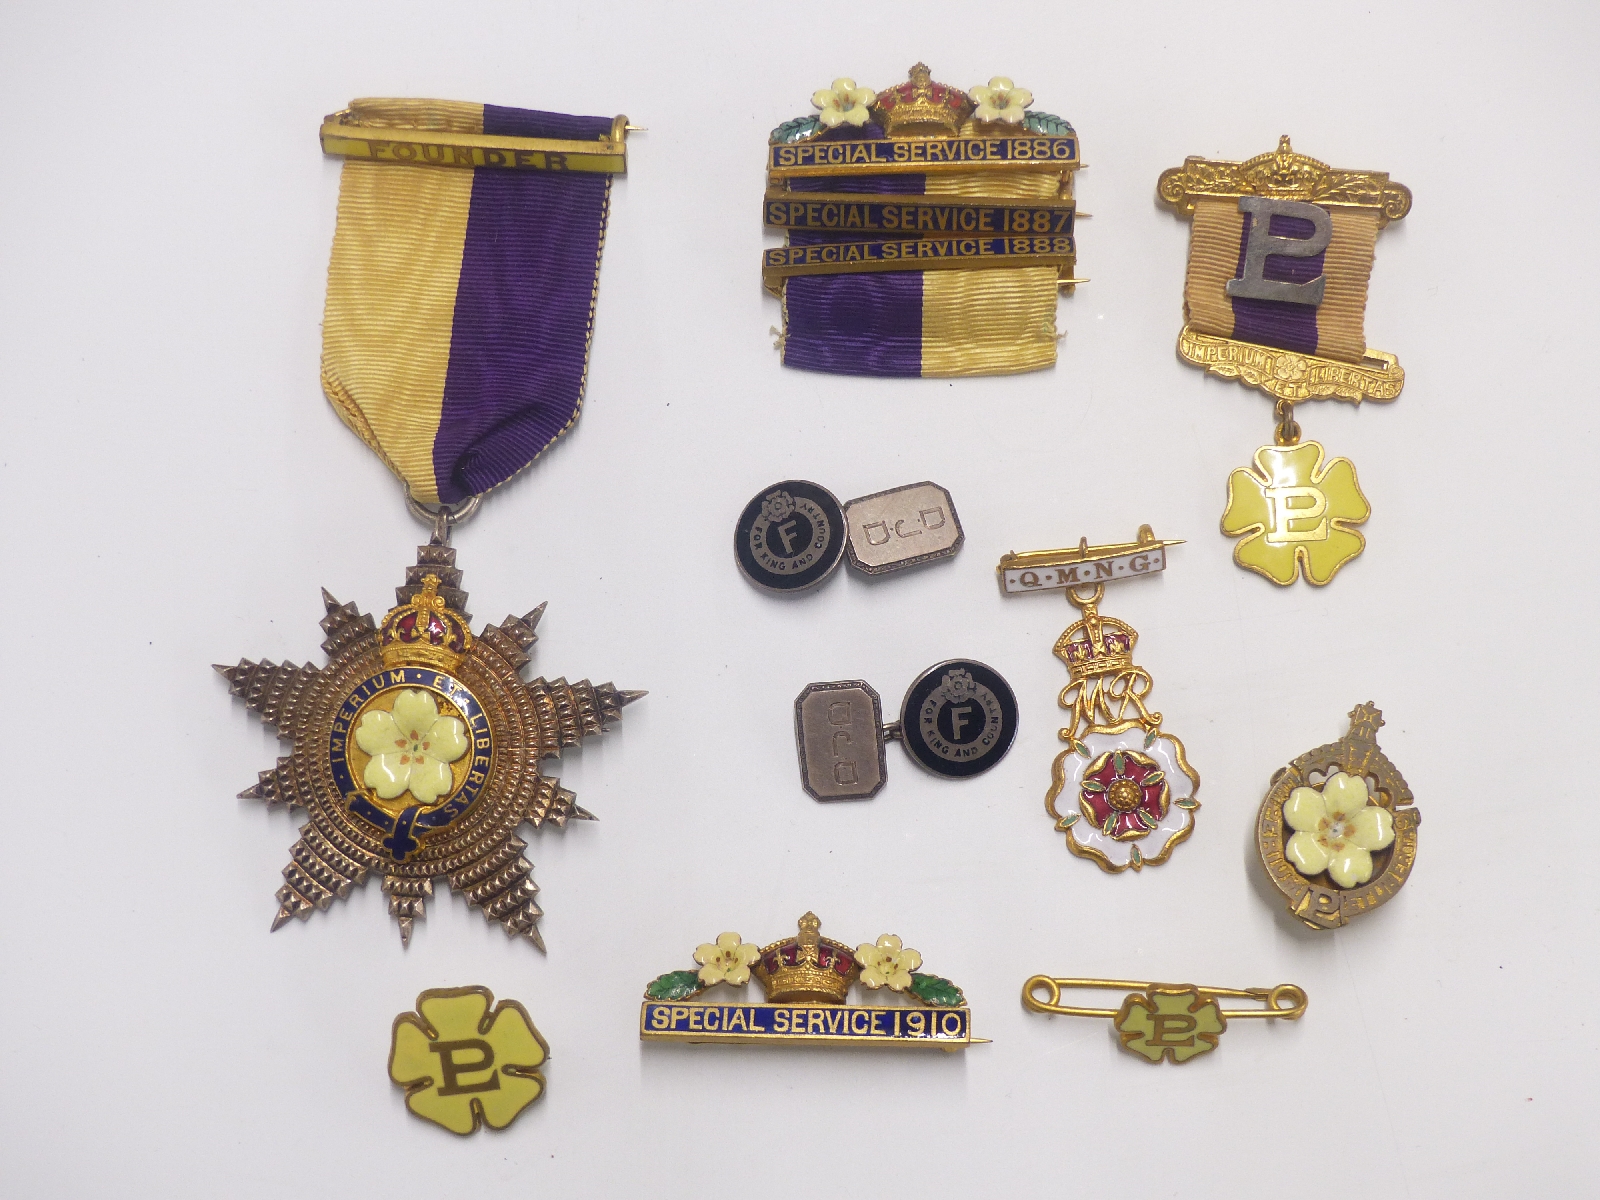 A collection of badges and a silver gilt medal all relating to Primrose club